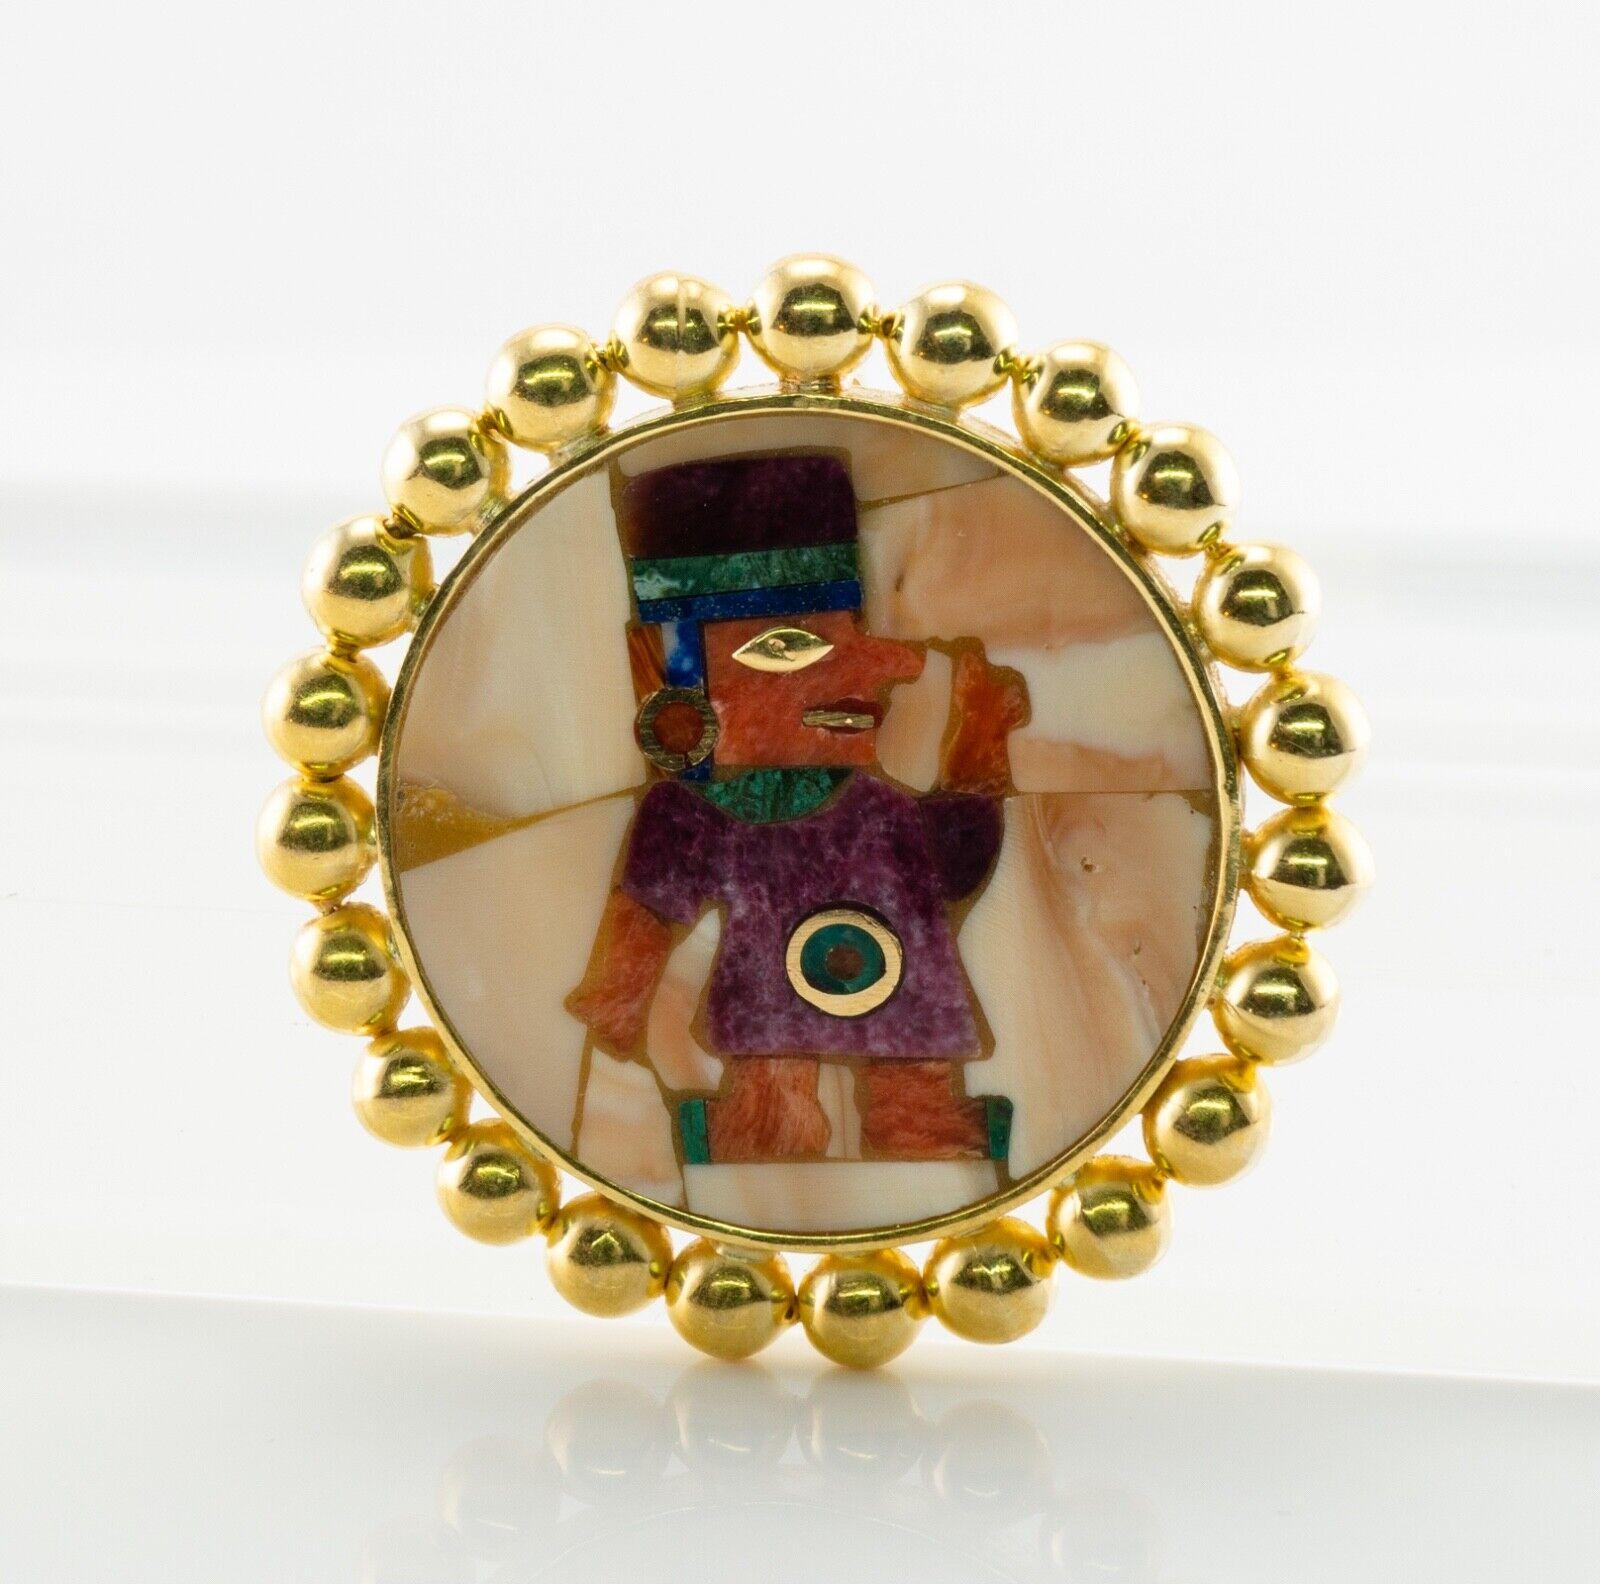 Aztec Peruvian Figure Pendant Brooch 18K Gold

This outstanding vintage piece can be worn as a pendant or a brooch. It is crafted in solid fine 18K Yellow Gold and also hallmarked with JTM. The inlaid figure of a South American man is so colorful